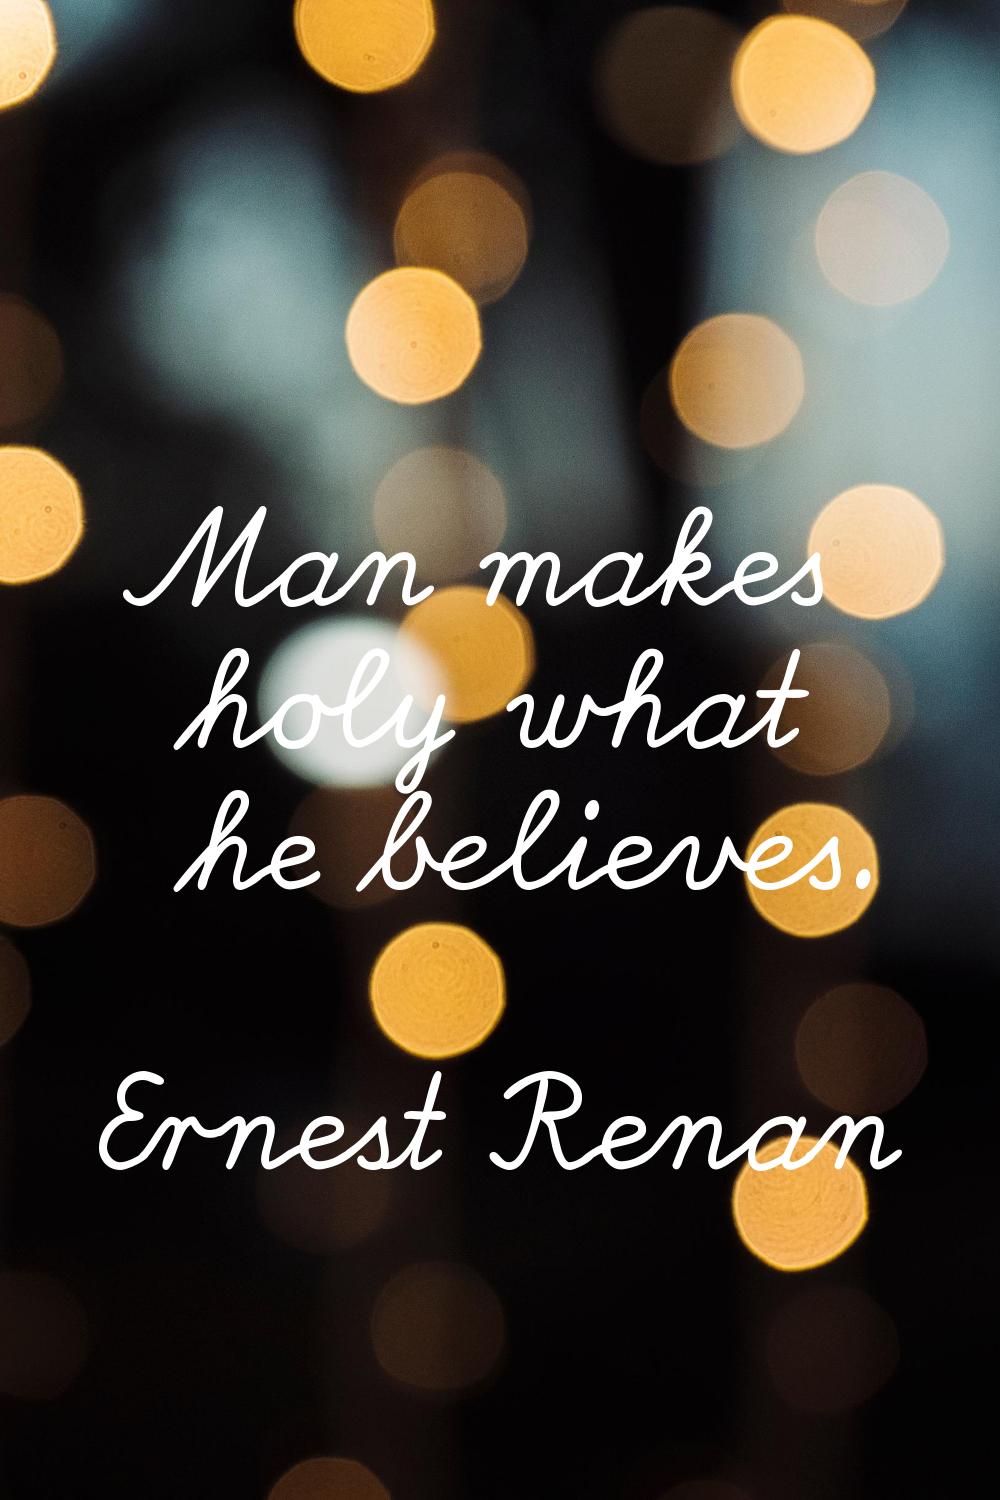 Man makes holy what he believes.